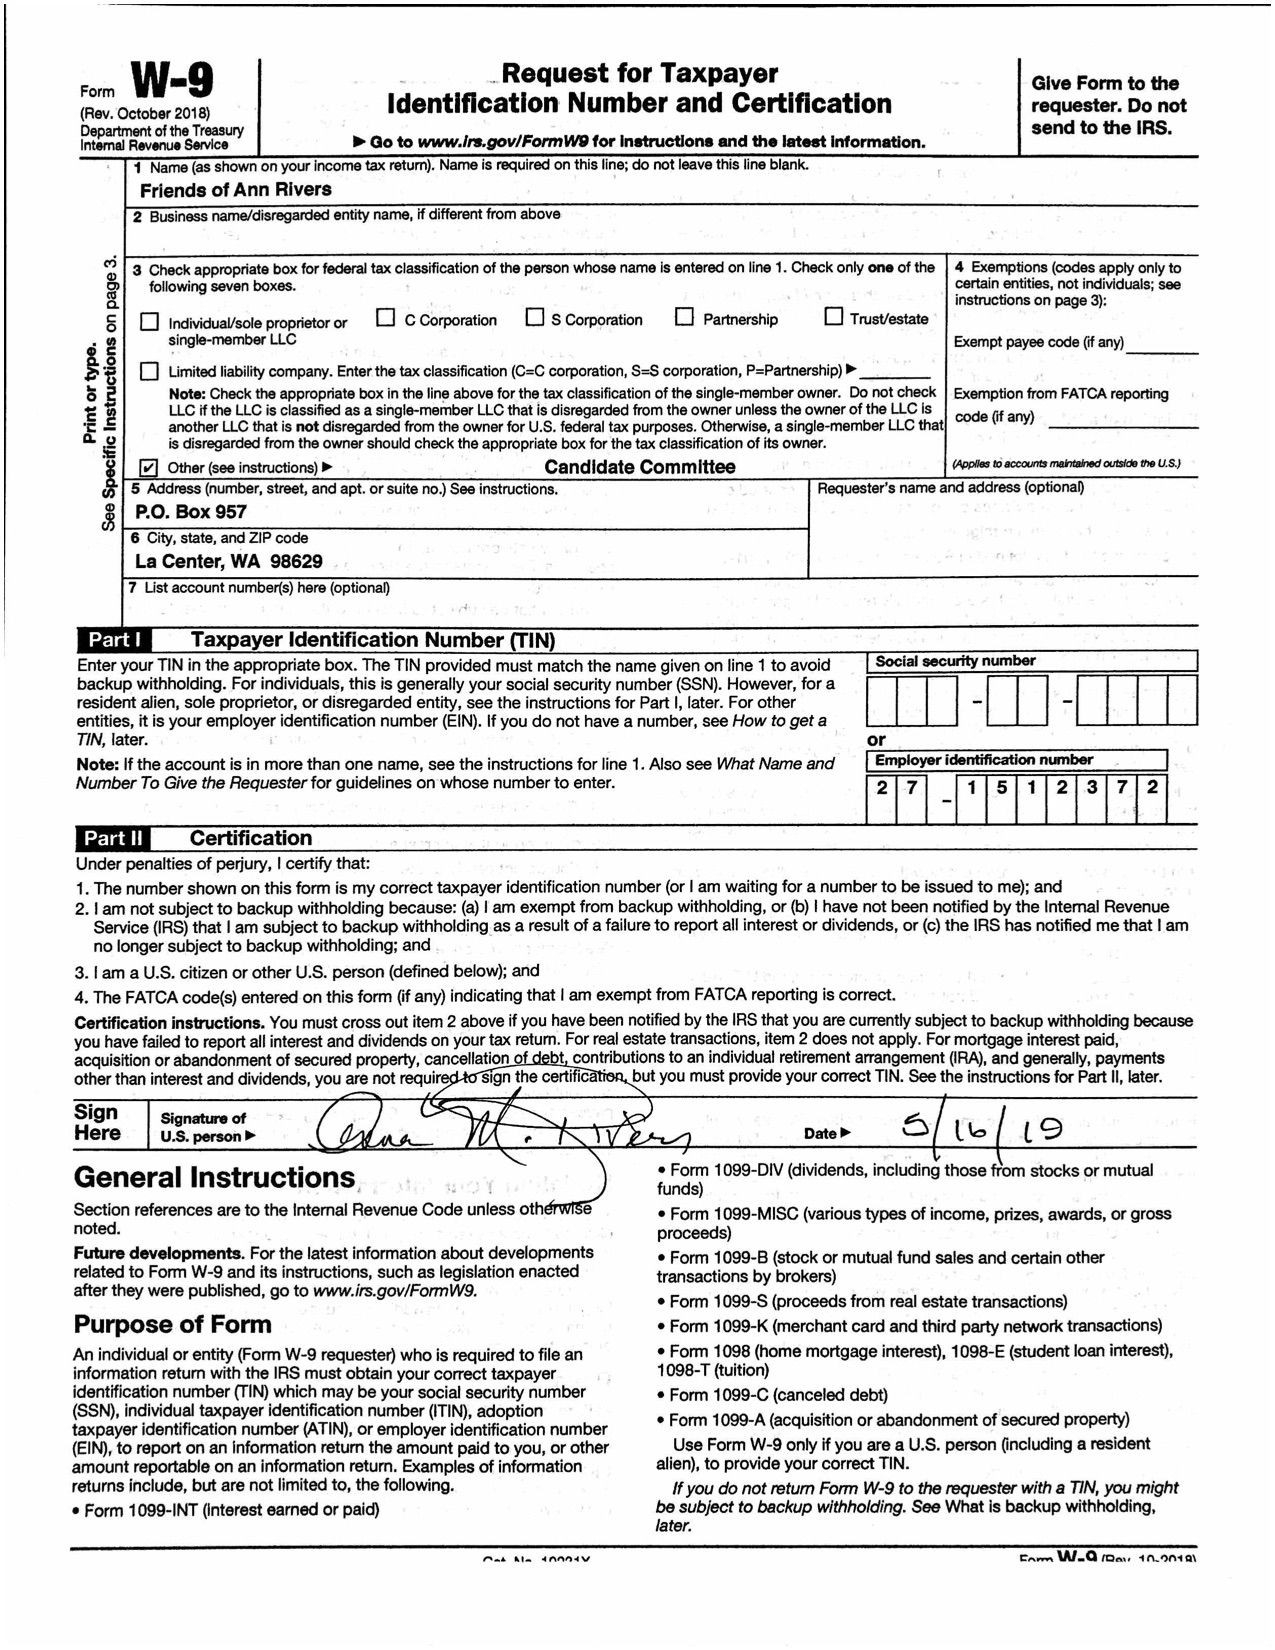 W9 Forms 2021 Printable | Tax Forms, Irs Forms, Calendar-Blank 2021 W9 Form